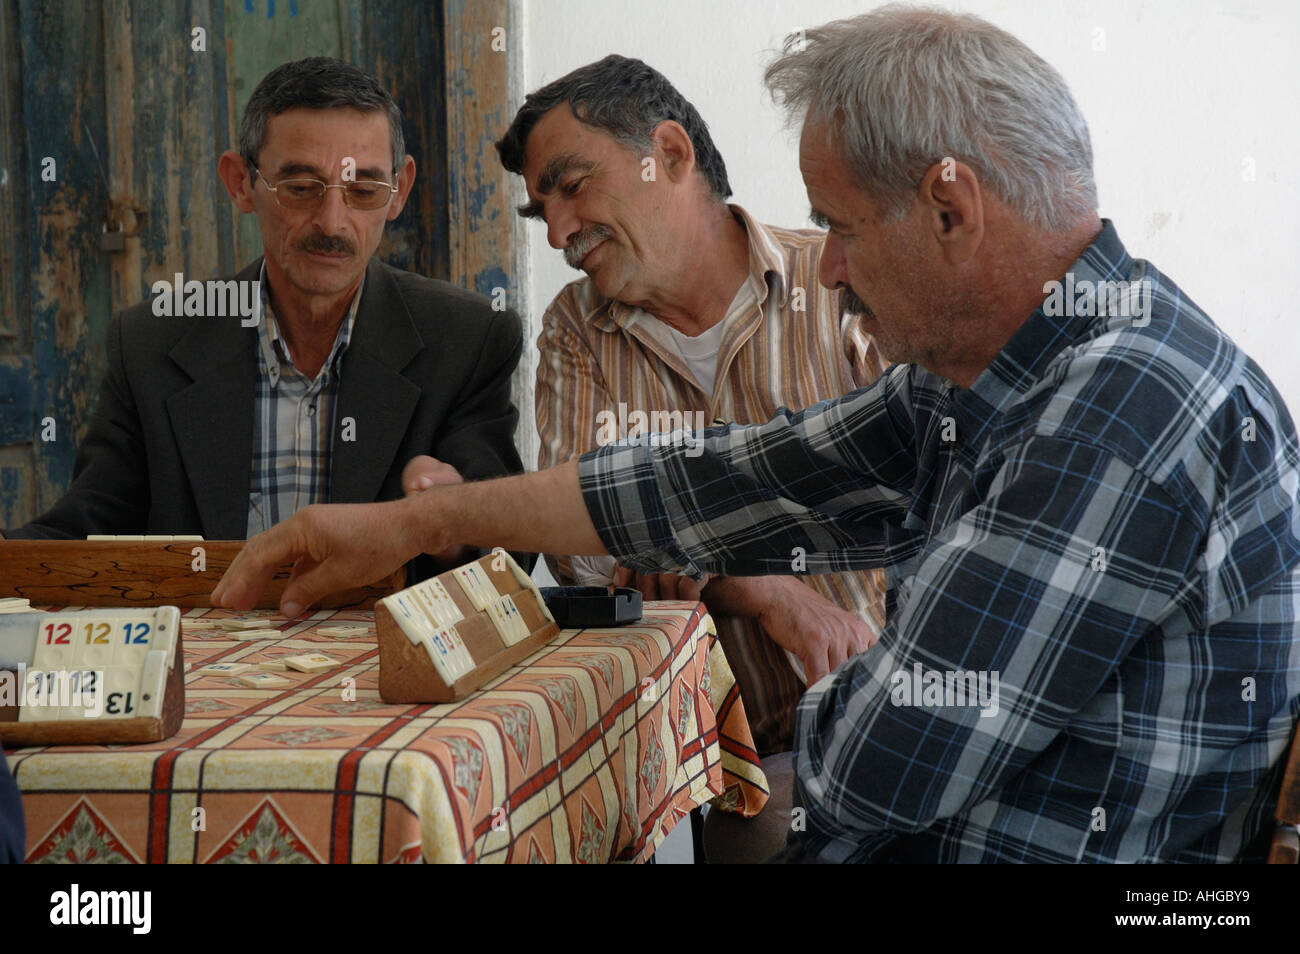 Men in small rural village of Bezirgan Southern Turkey playing game of Okay. Stock Photo